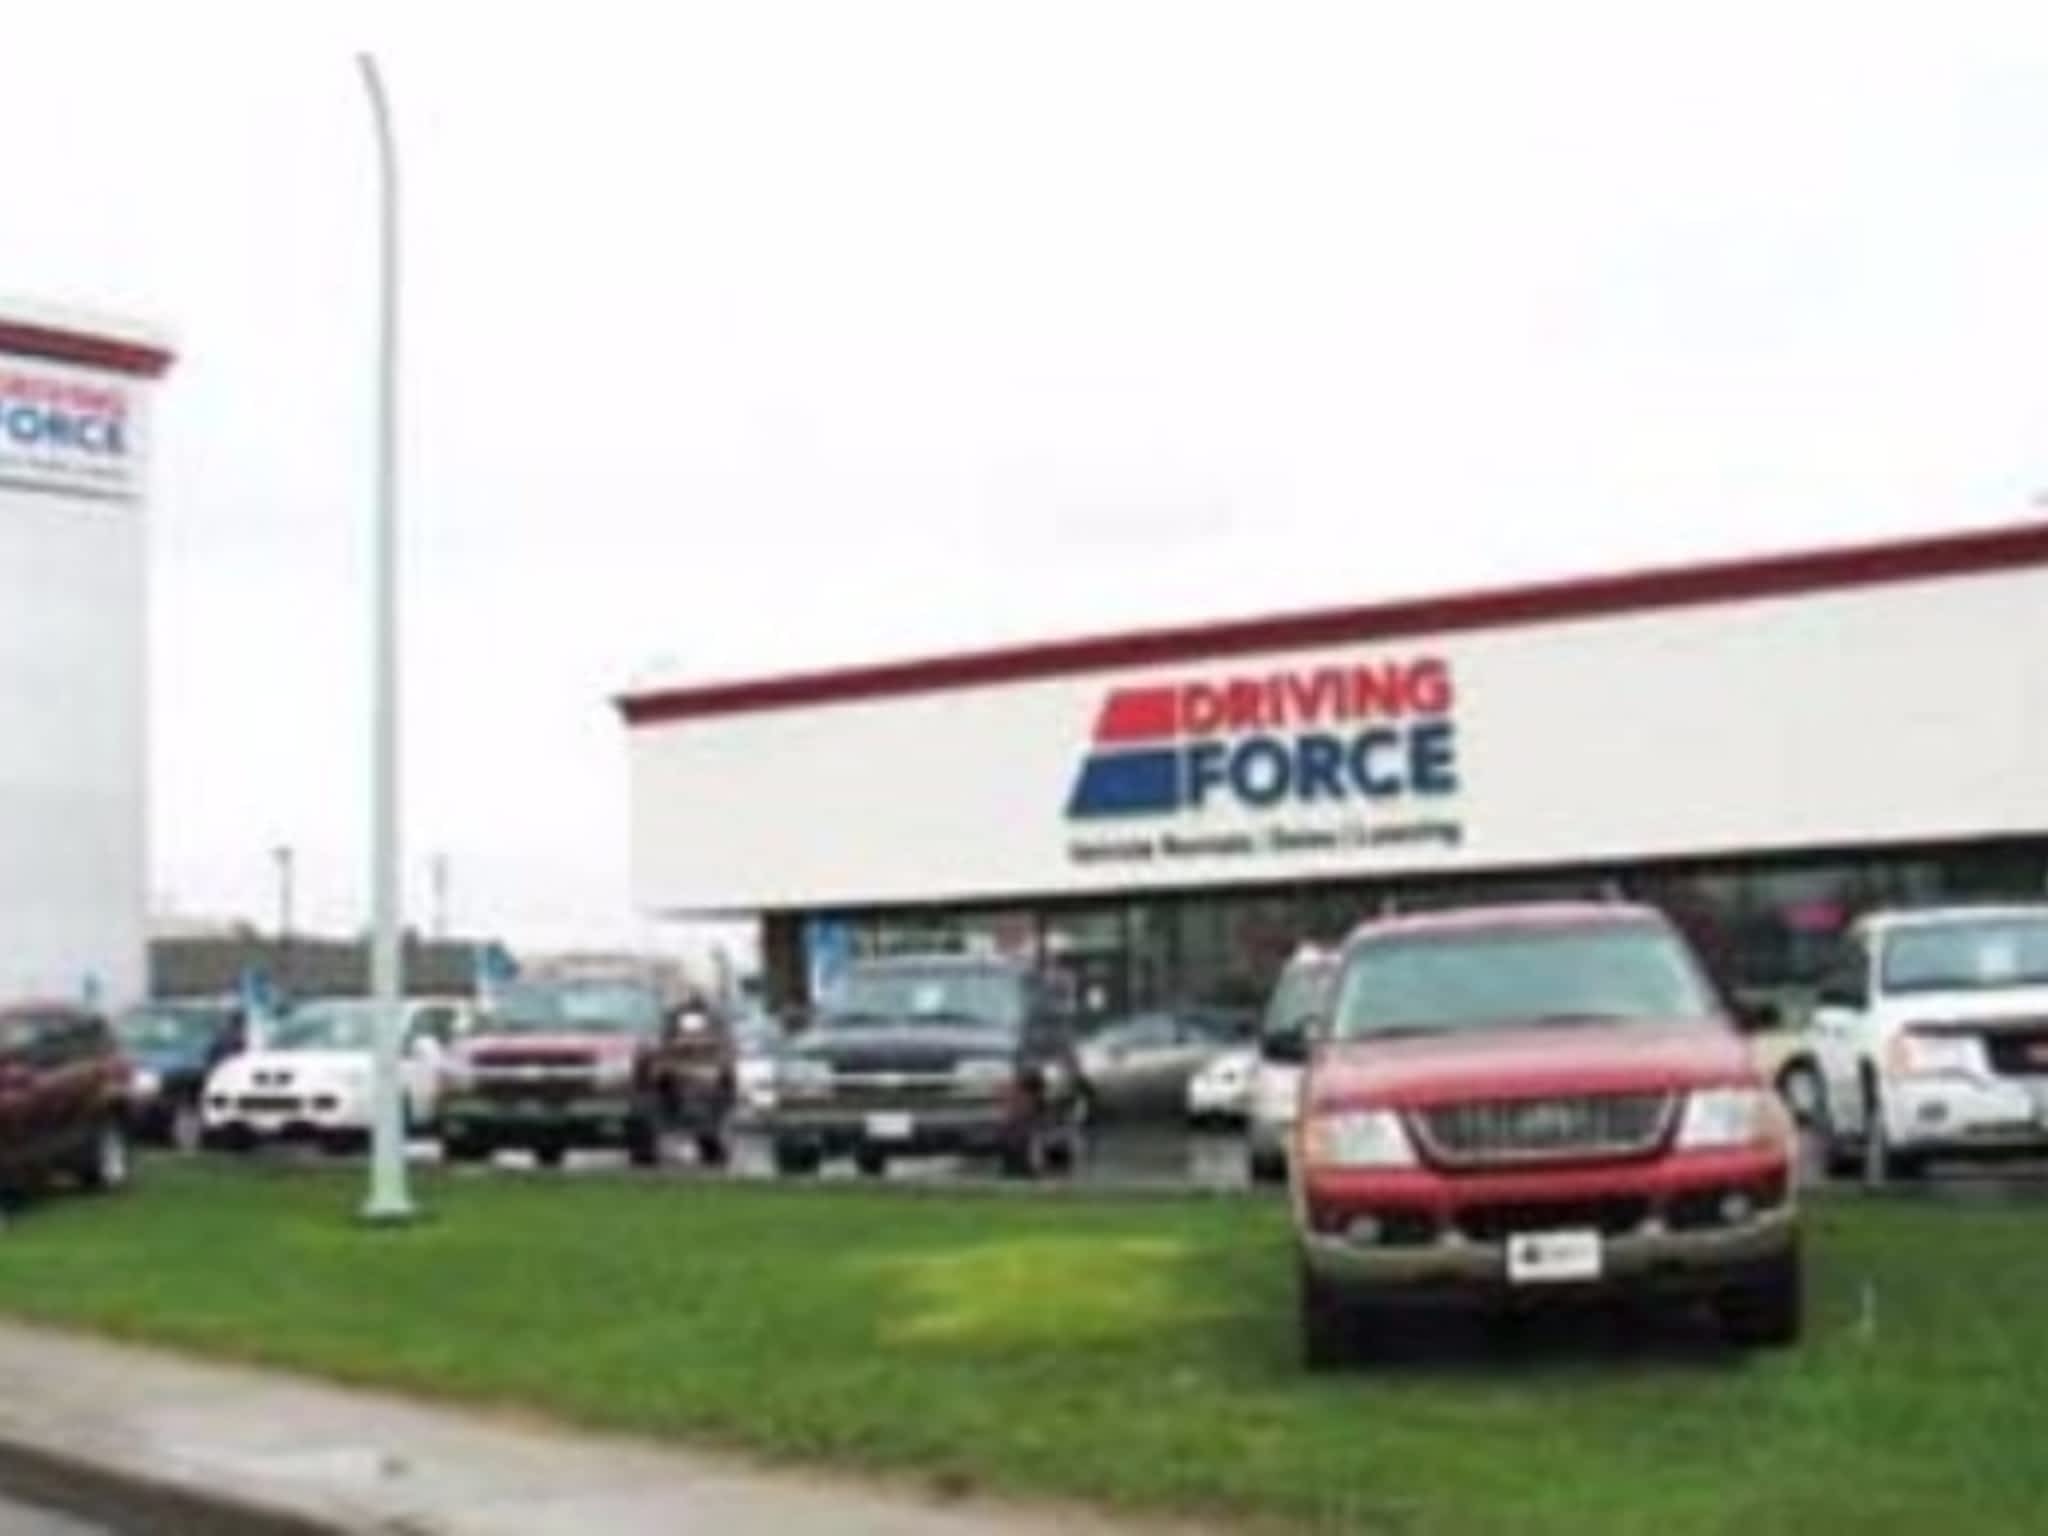 photo Driving Force Vehicle Rentals Sales & Leasing